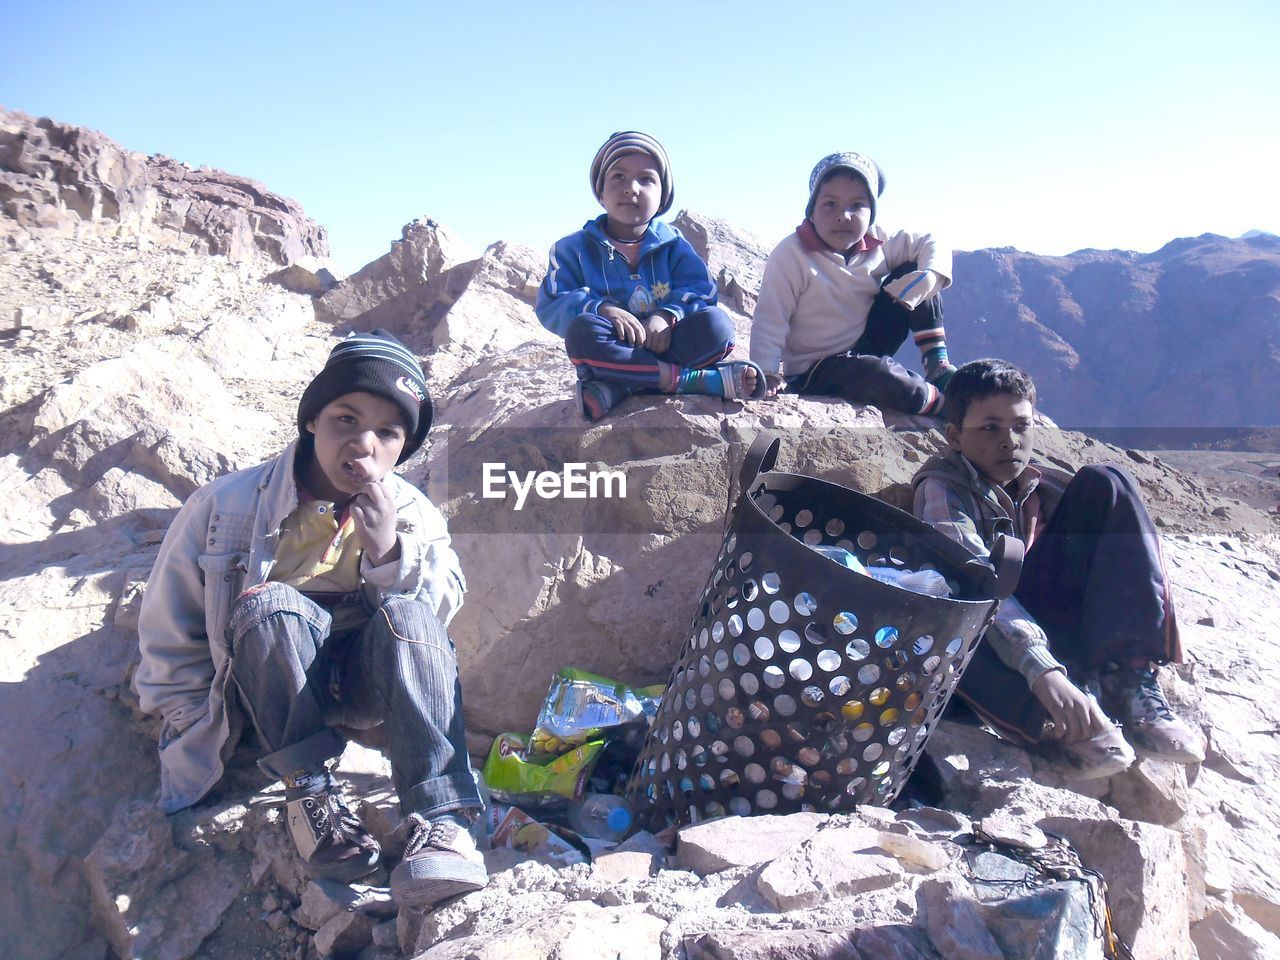 Friends sitting on rock formations amidst garbage can